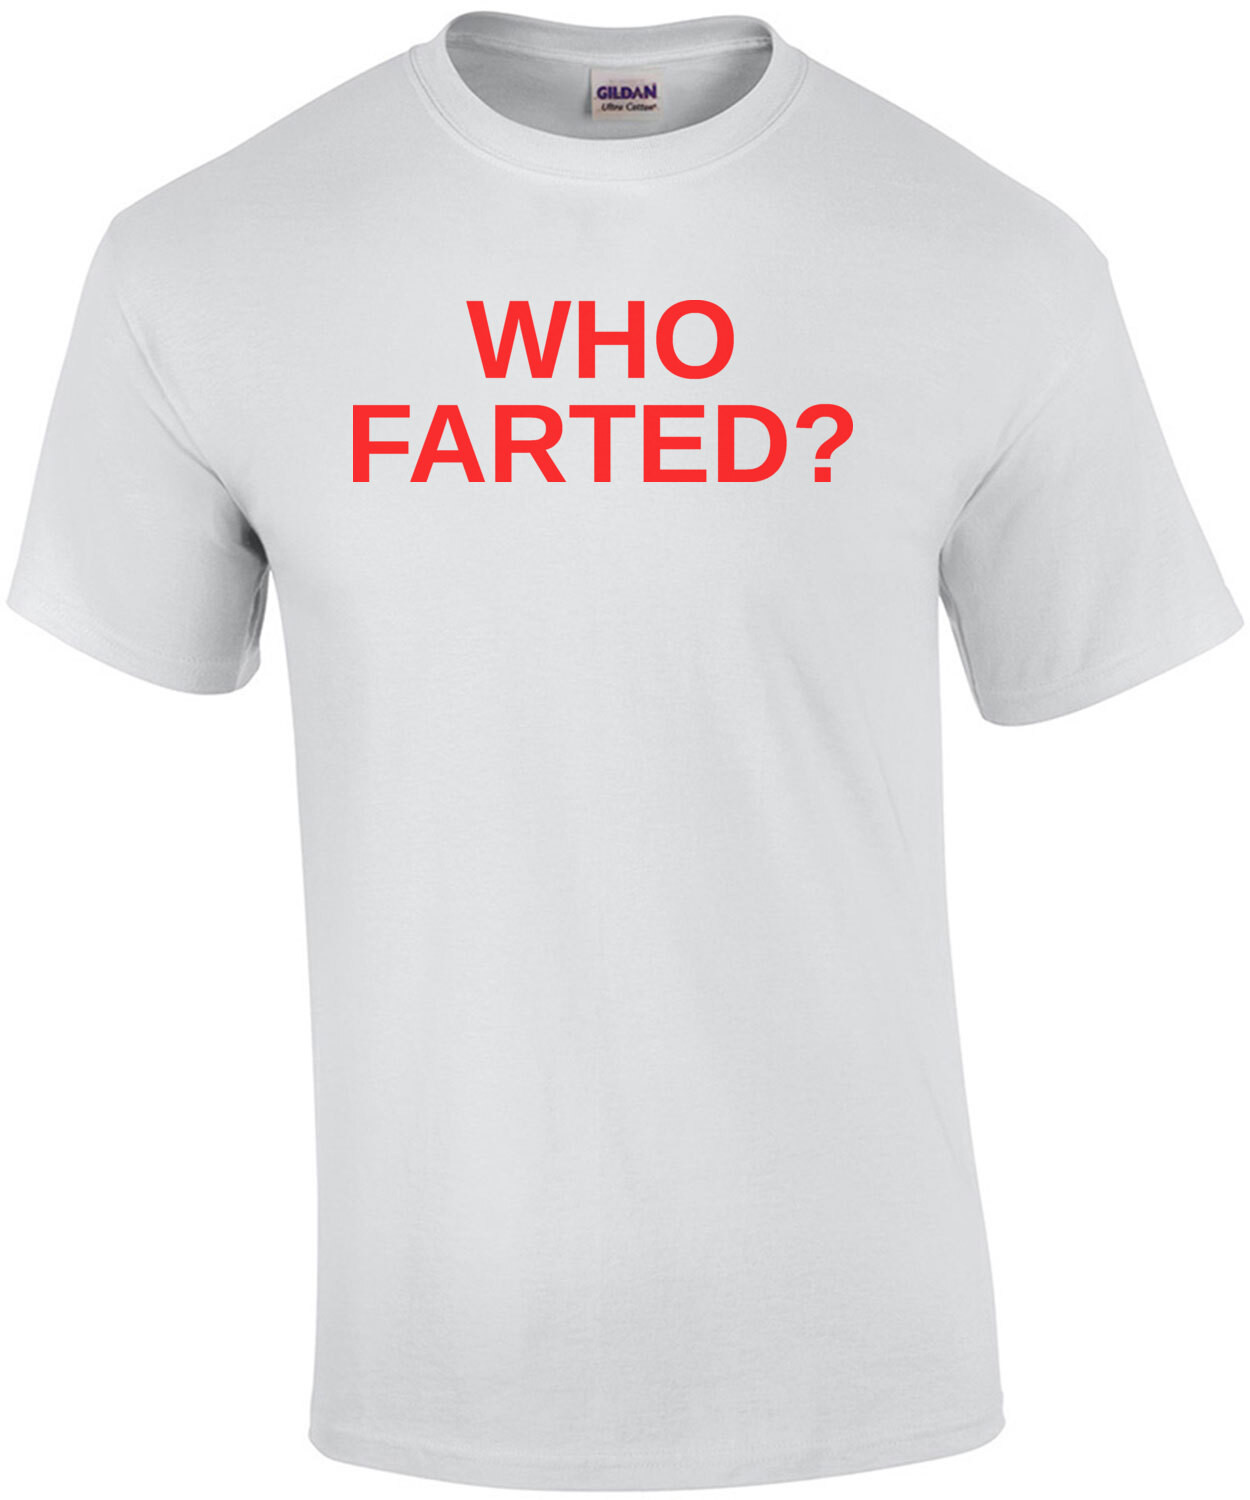 Who Farted? T-Shirt worn by booger in Revenge if the Nerds 80's T-Shirt